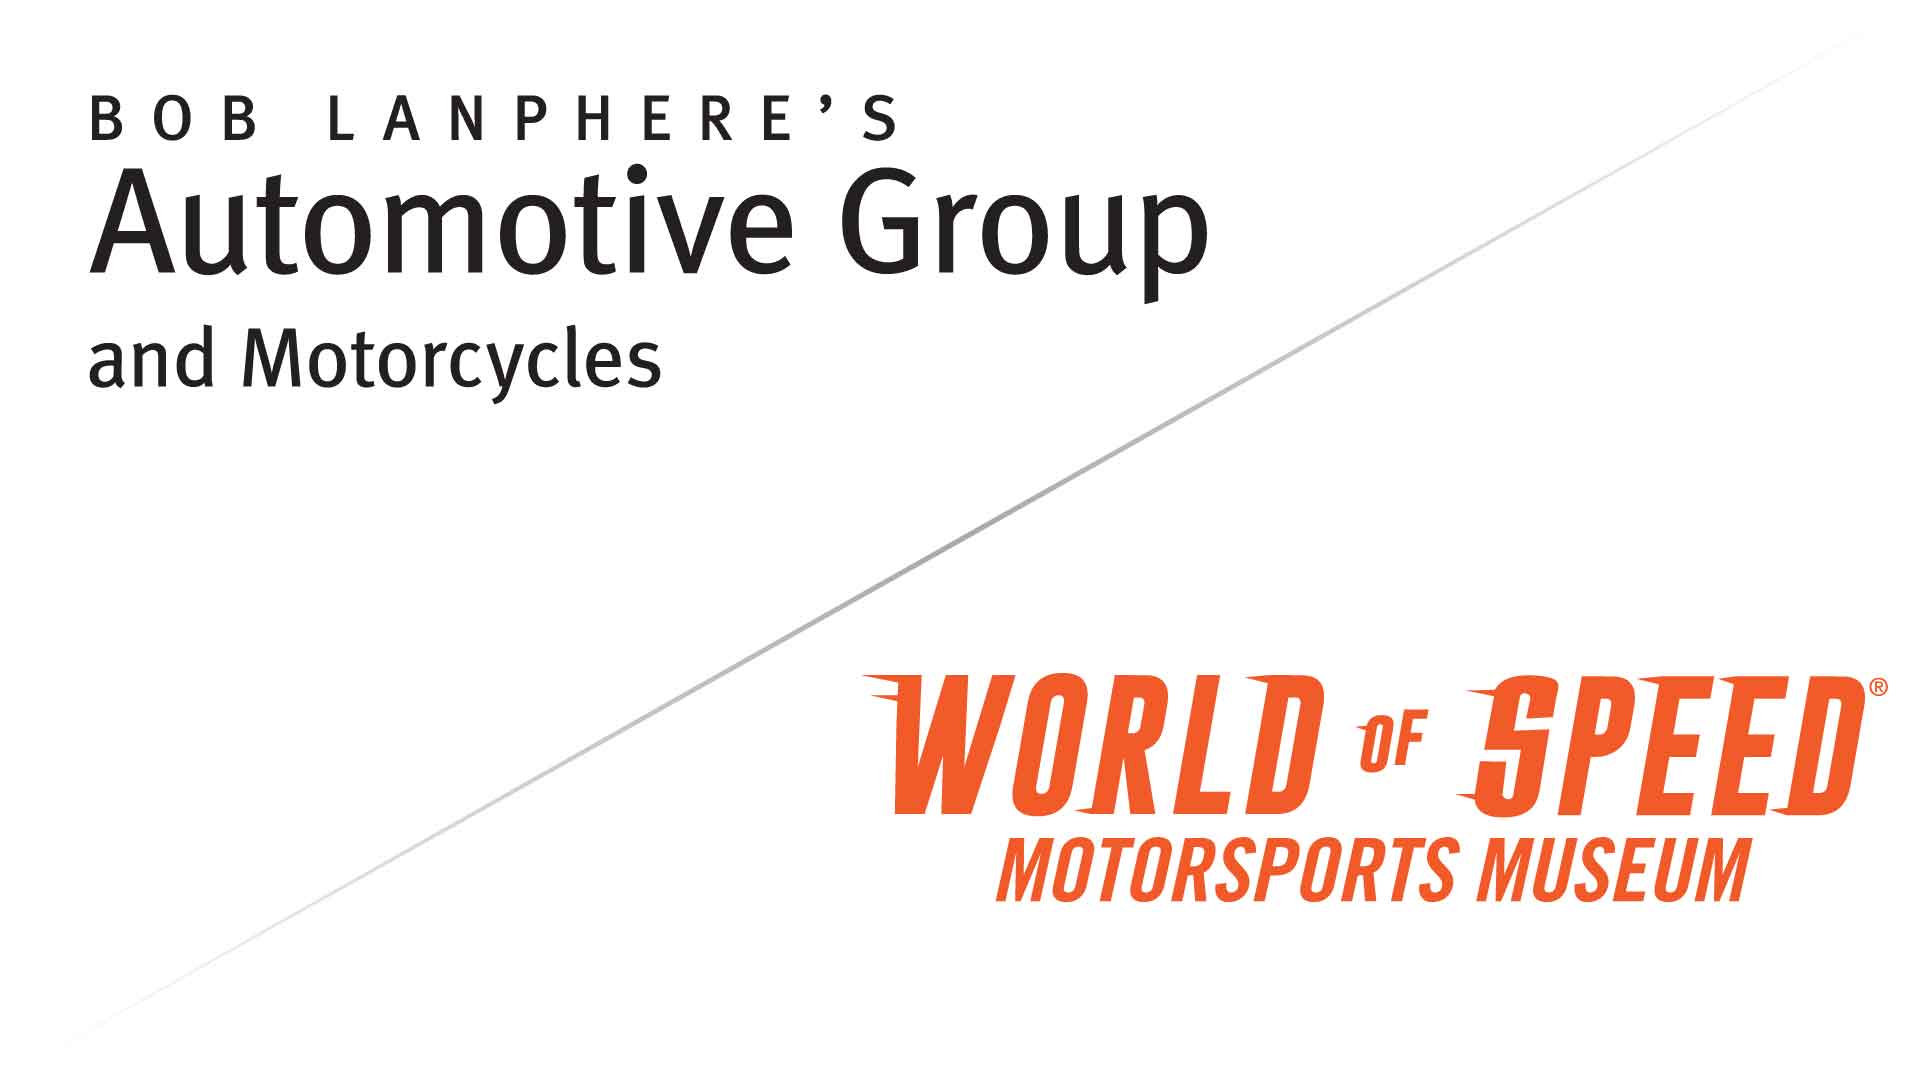 Lanphere Auto Group and Motorcycles and World of Speed Motorsports Museum Join as Partners with Grand Prix of Portland